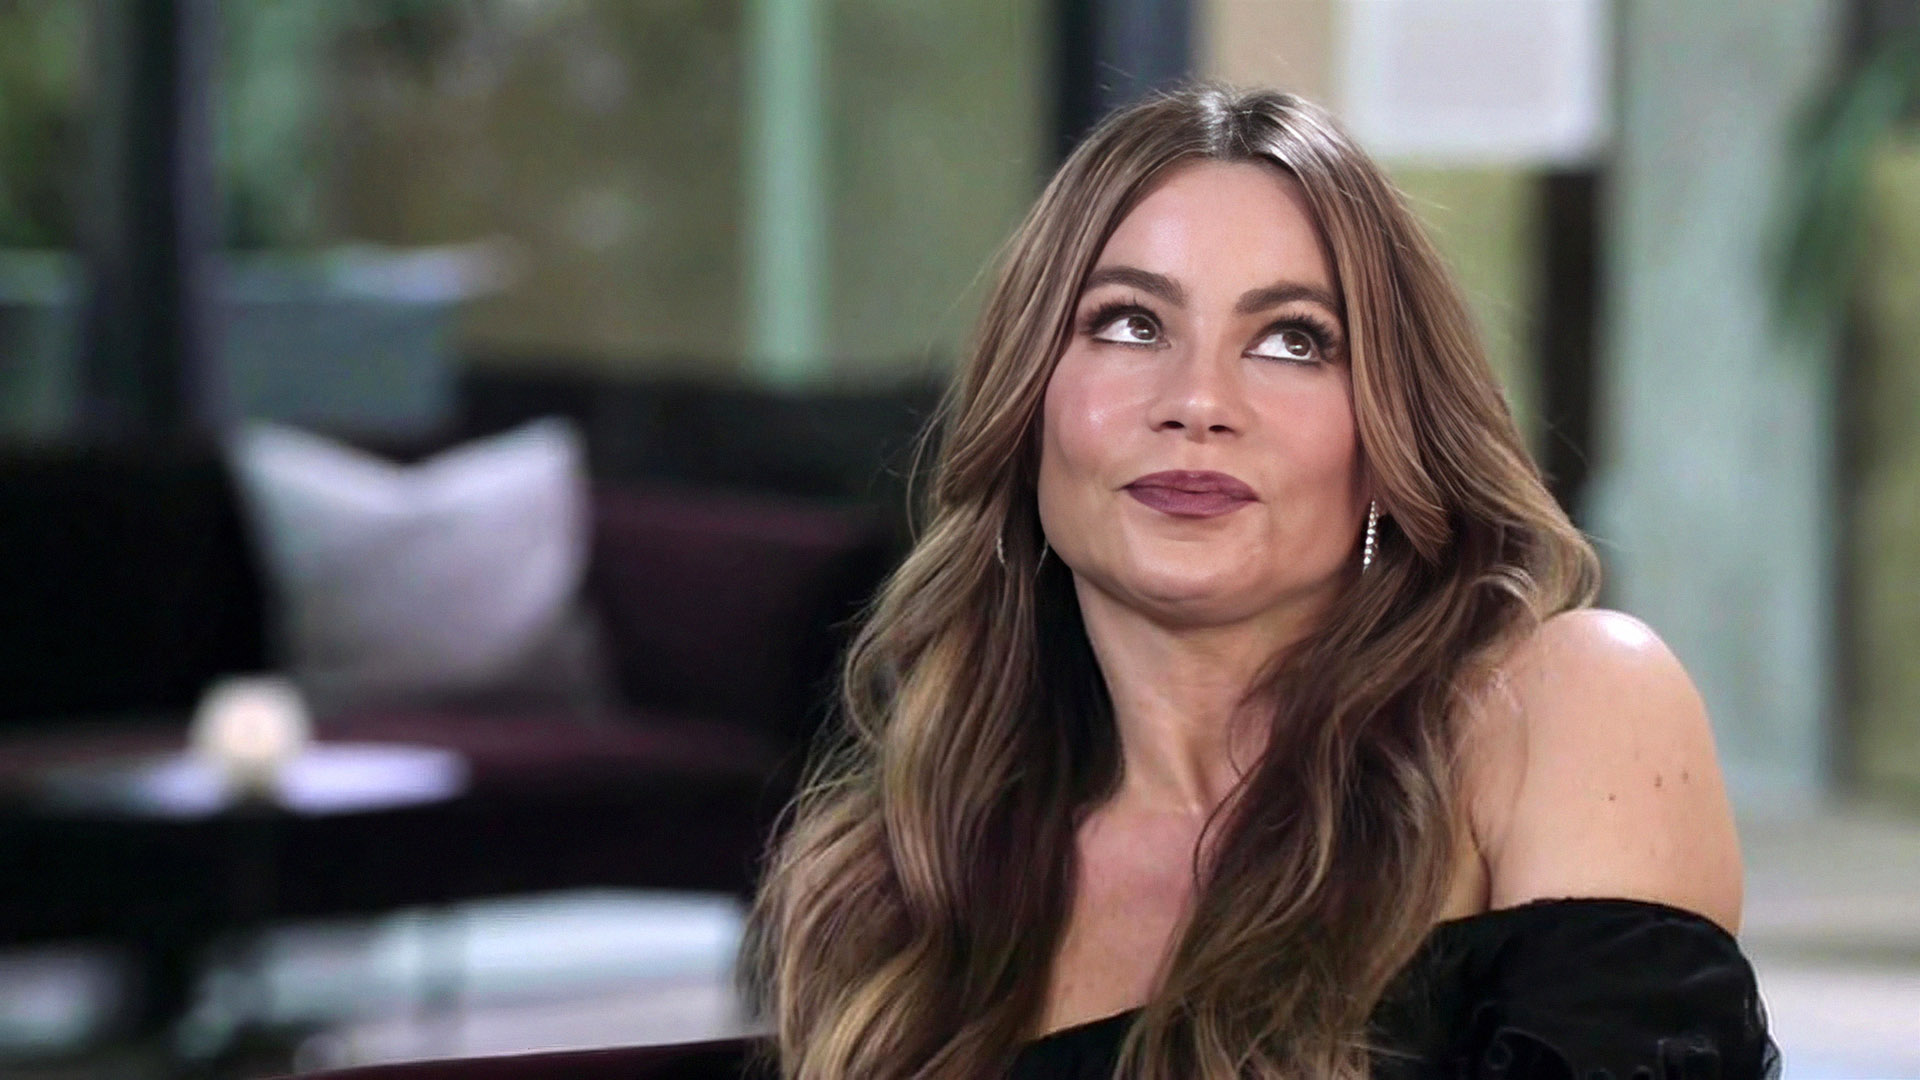 It Took ABC 3 Years to Find the Perfect Role for Sofia Vergara (You Know the One)